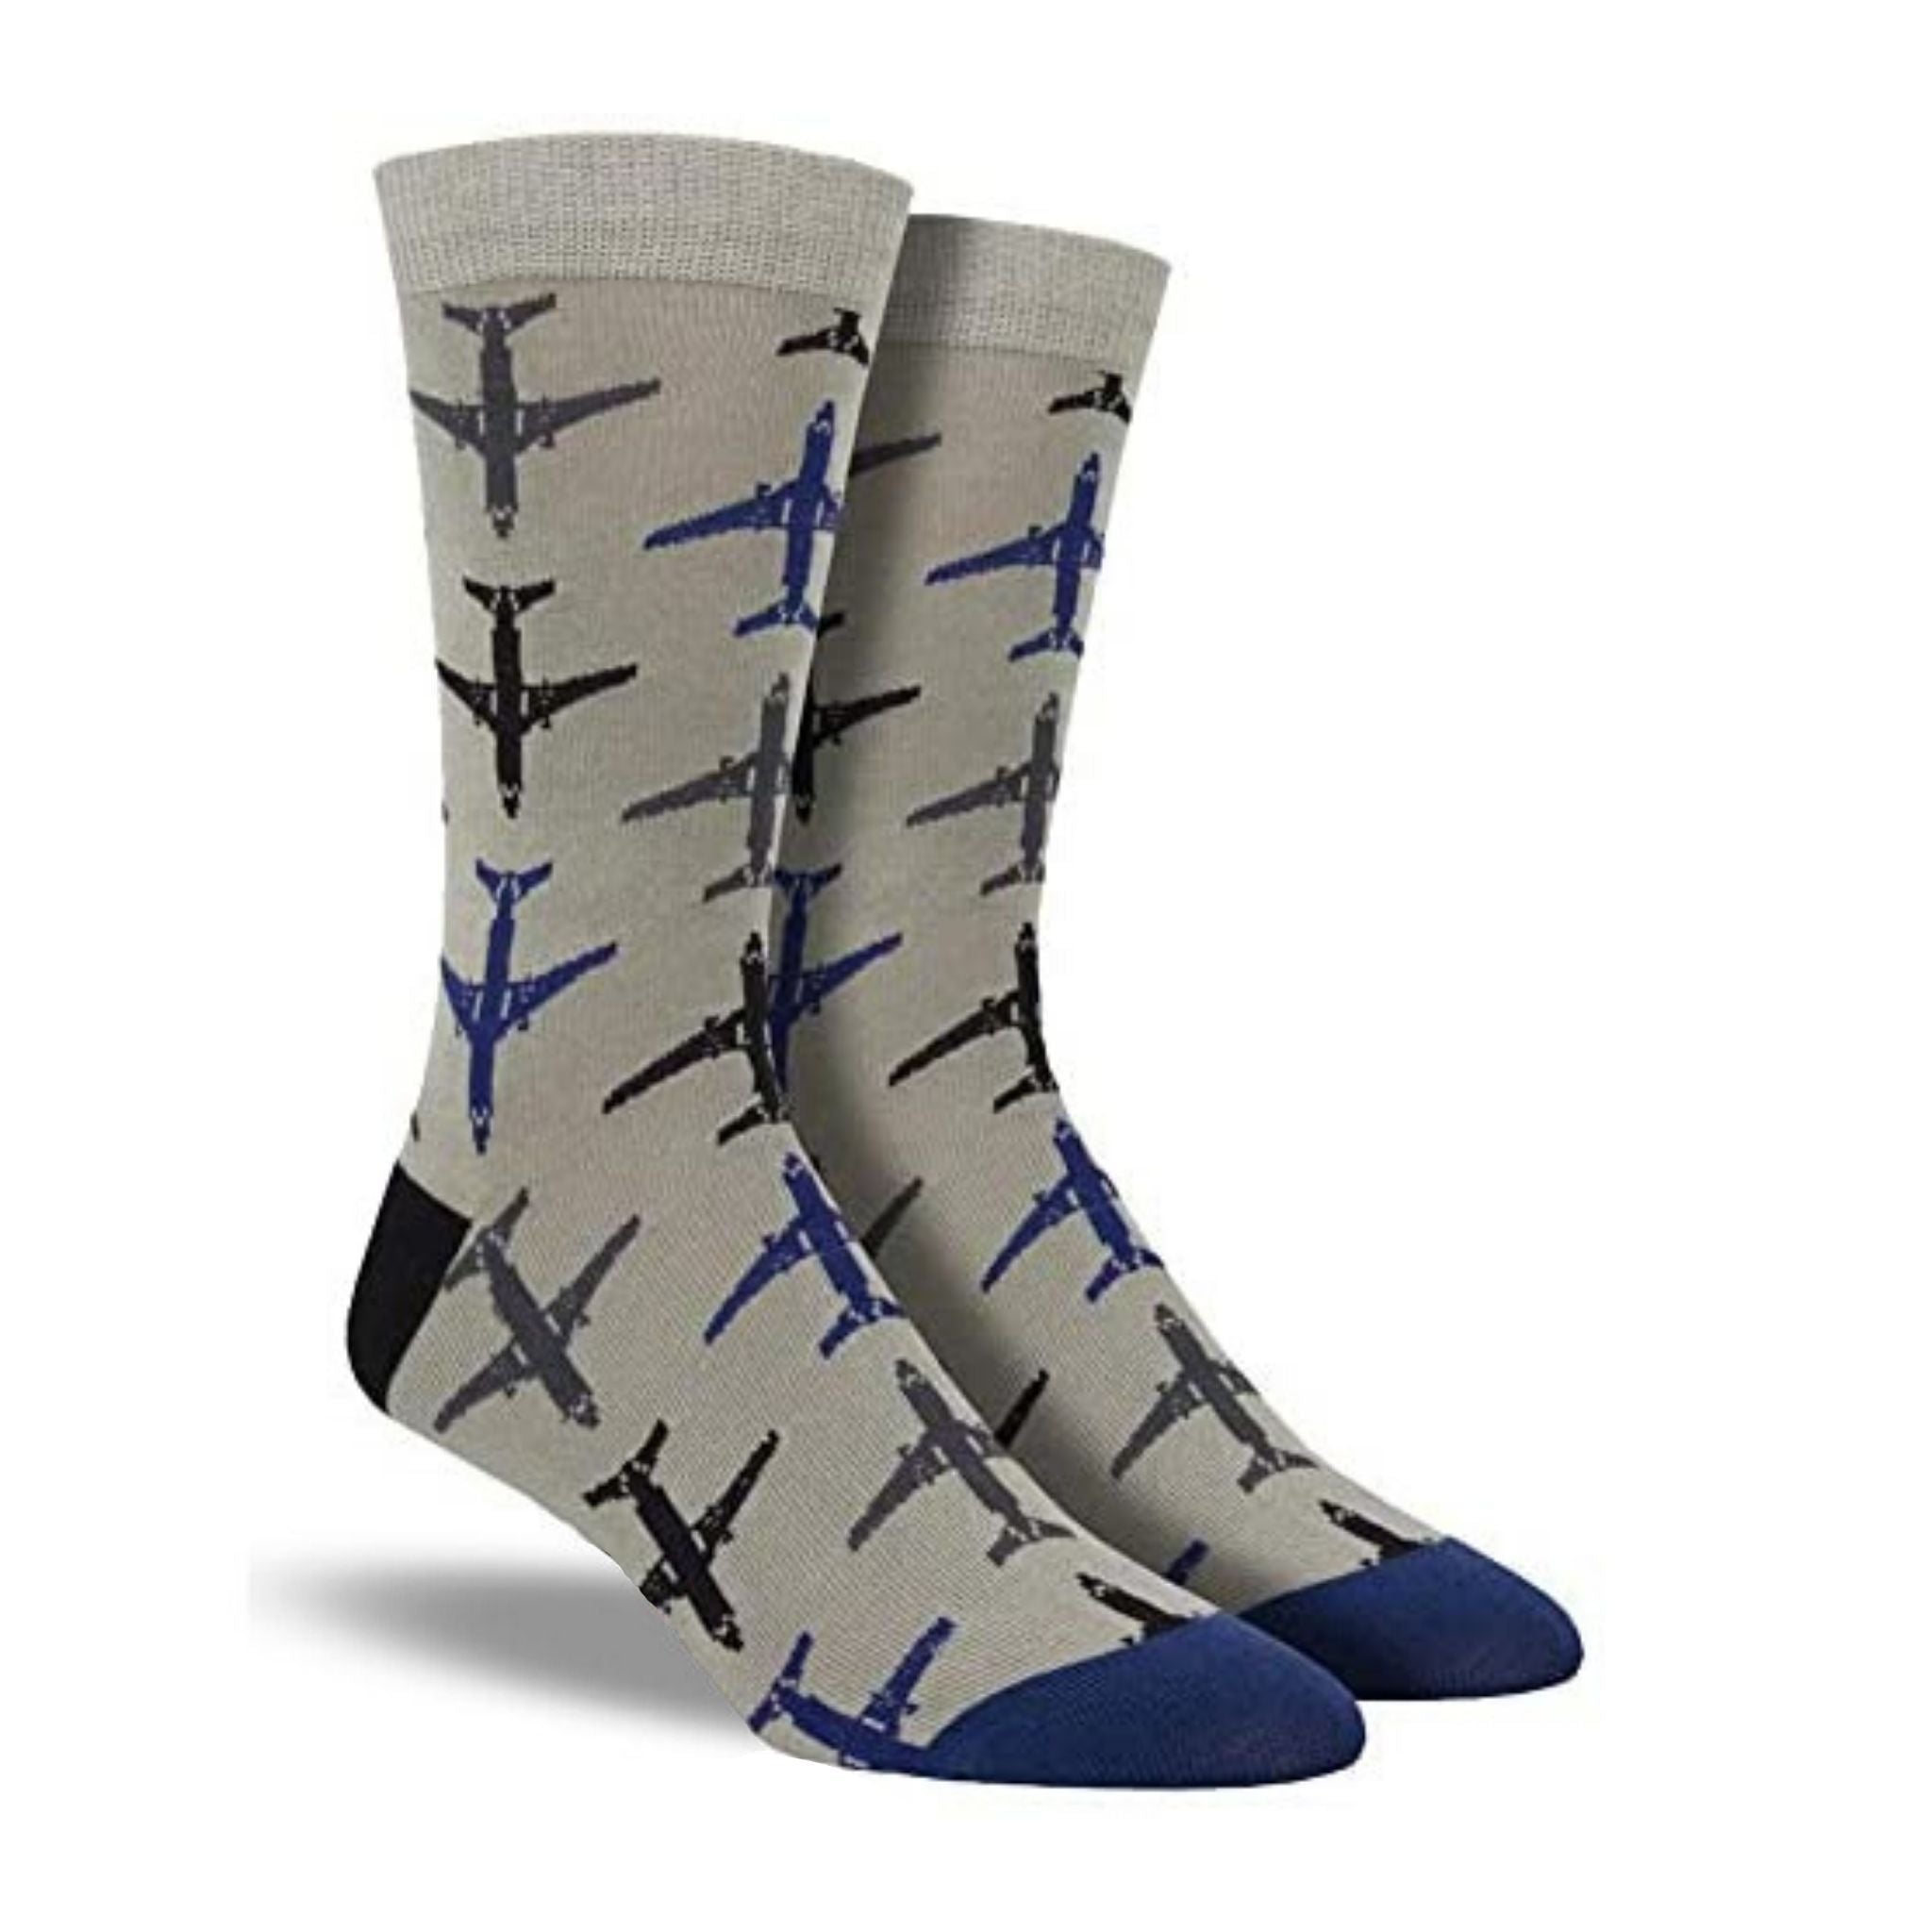 A pair of grey bamboo crew socks with blue and grey airplanes on them. Made by Socksmith.